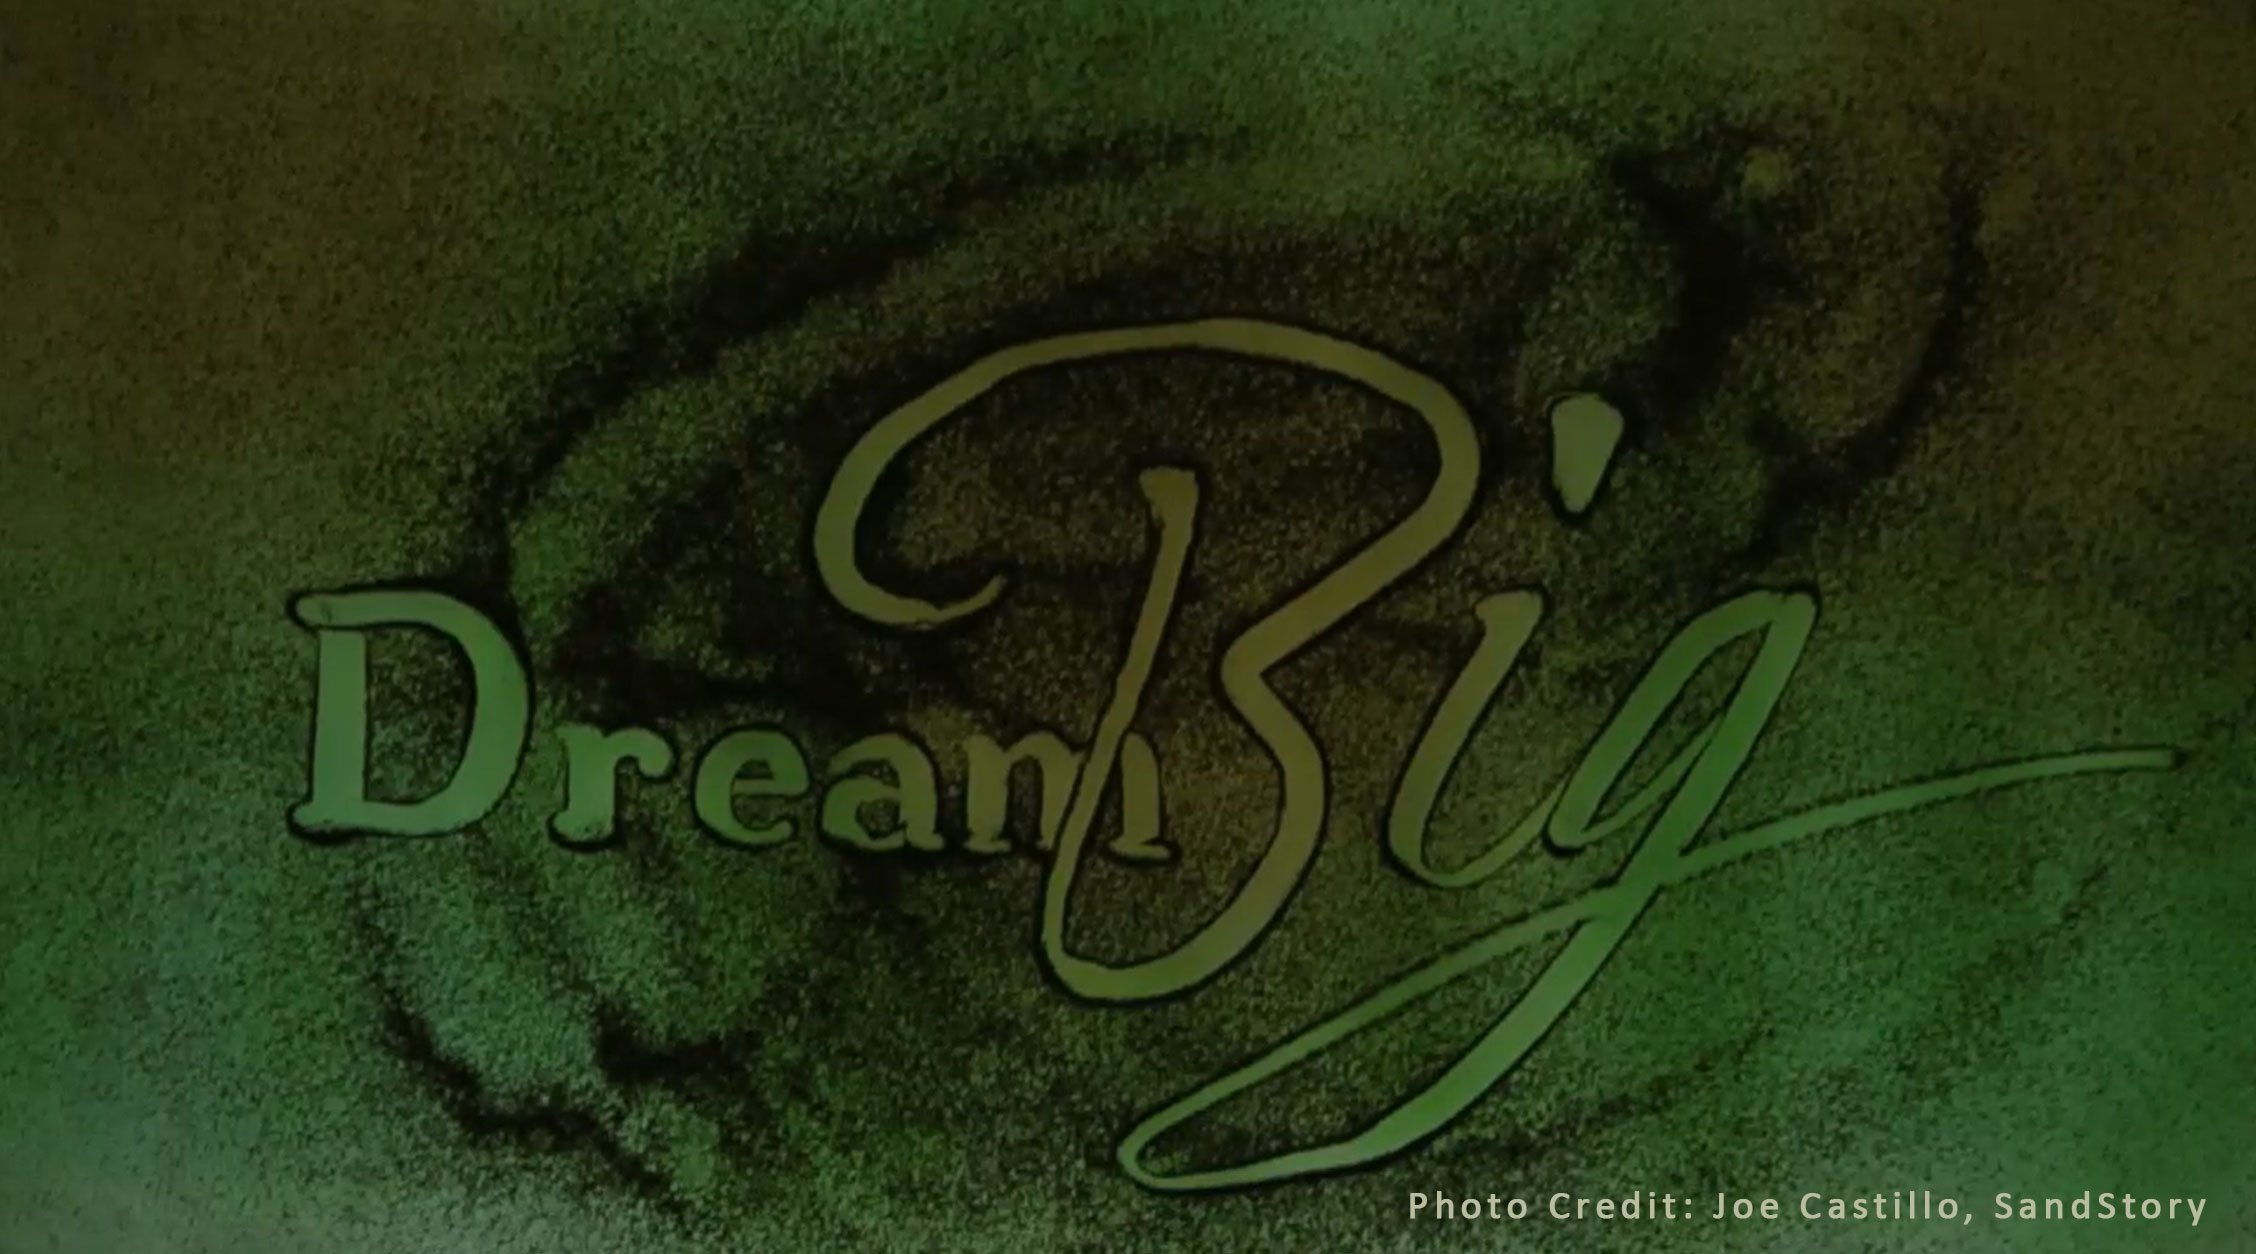 Sand artist Joe Castillo created beautiful works of art live on screen for the second night of entertainment. Shown here is our reminder to Dream Big!